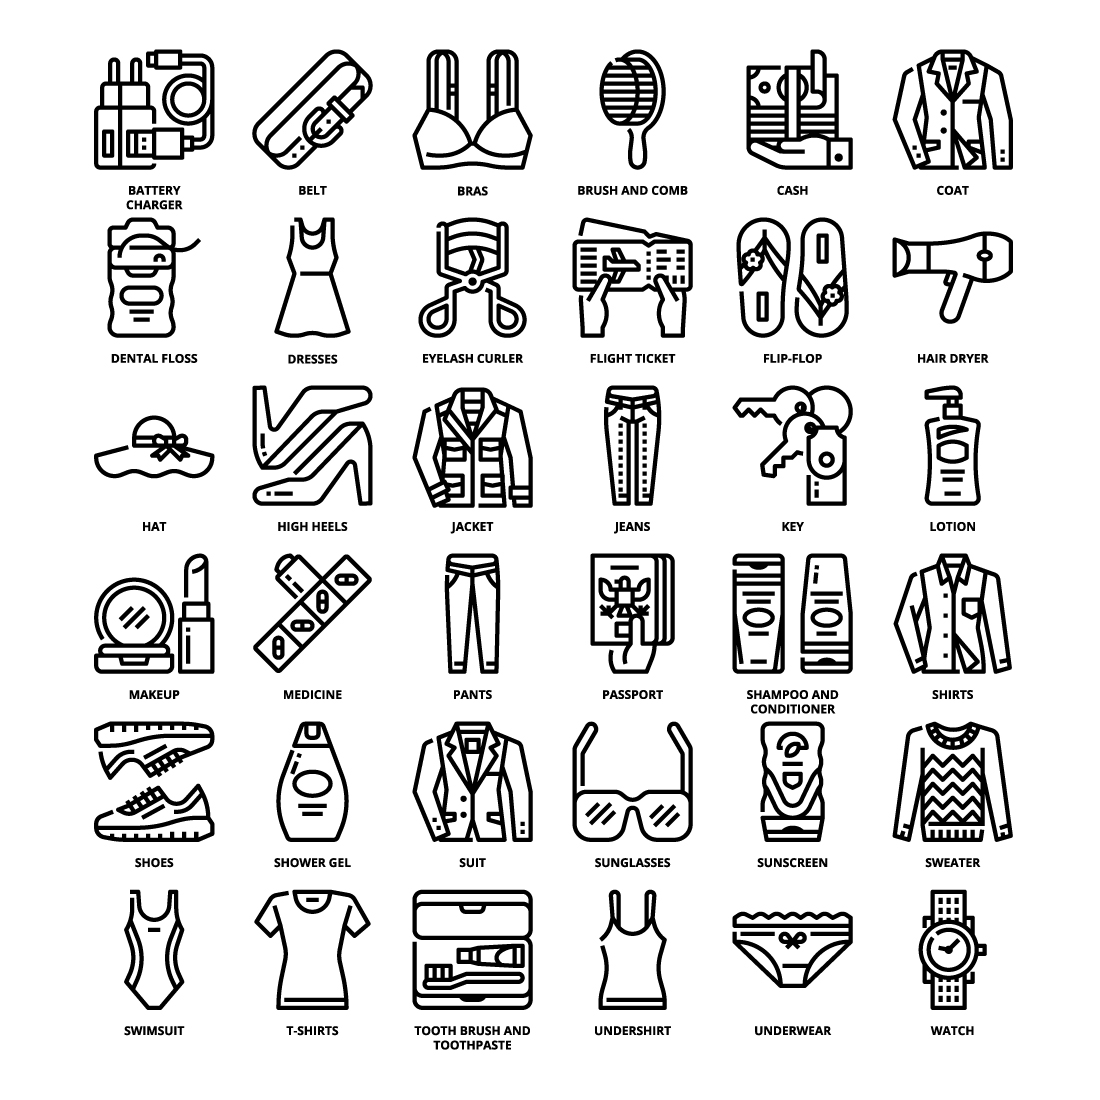 36 Women Travel Packing List Icons Set x 4 Styles preview image.